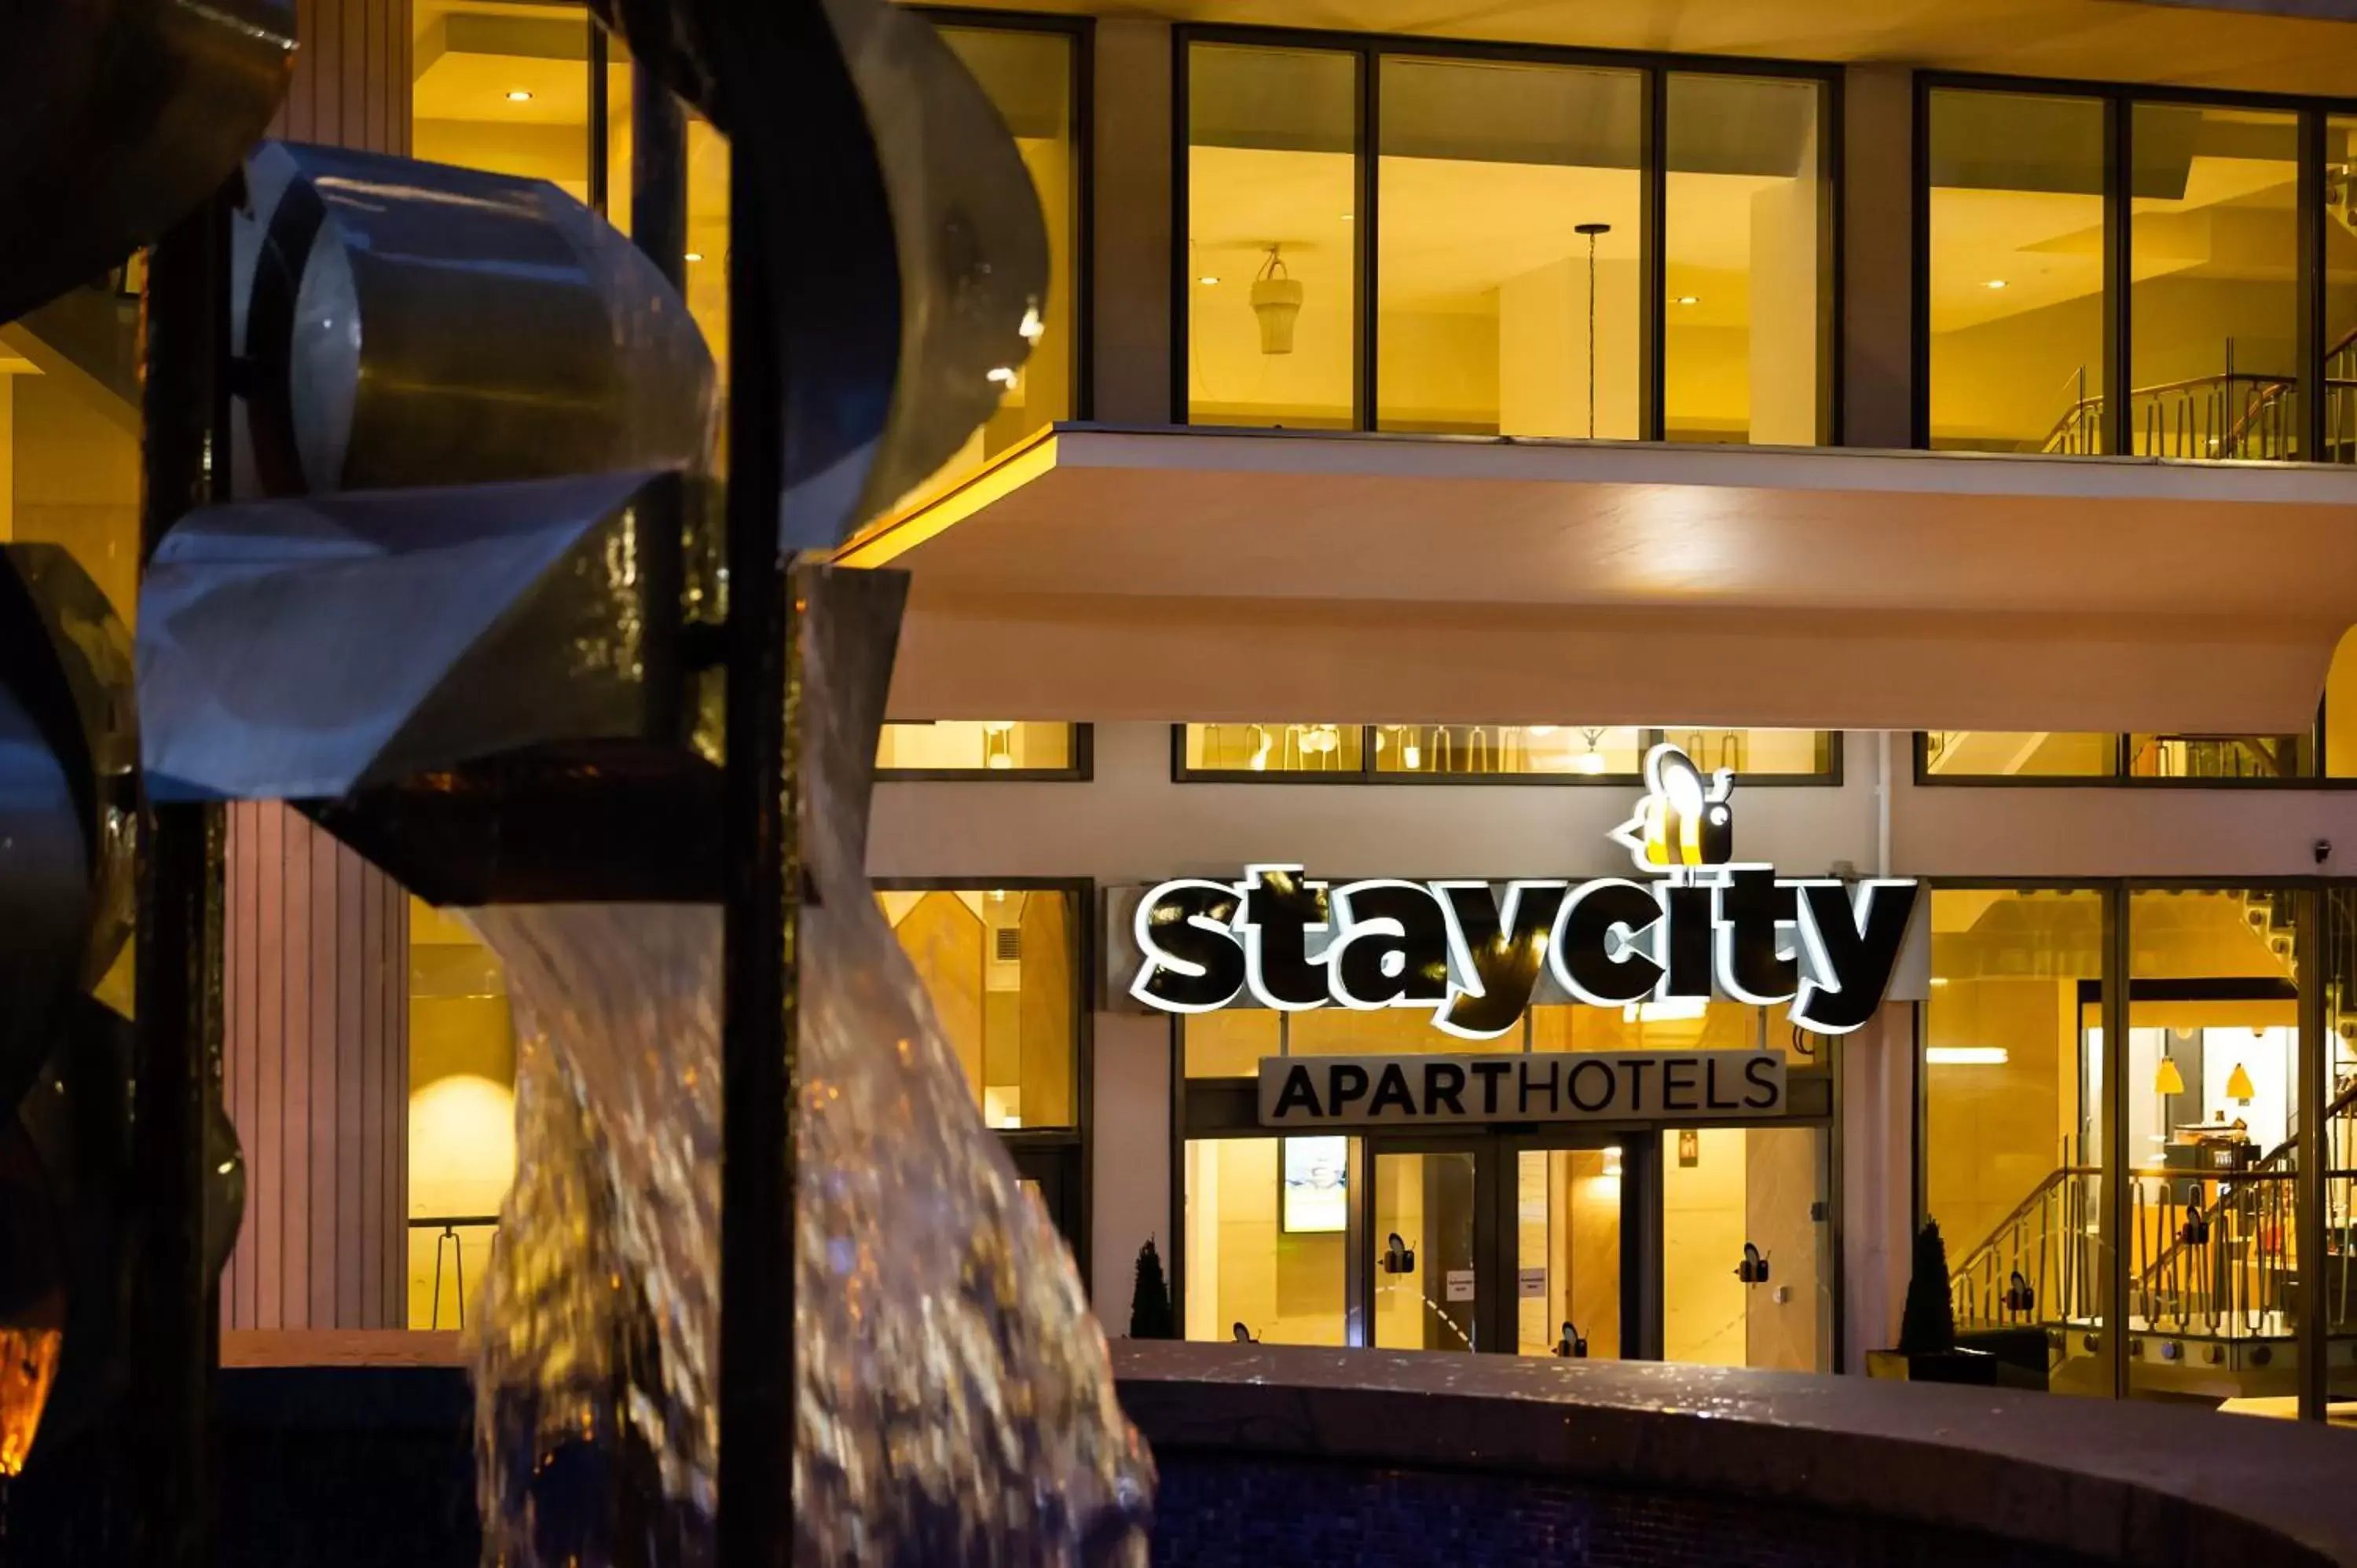 Facade/entrance in Staycity Aparthotels Liverpool Waterfront